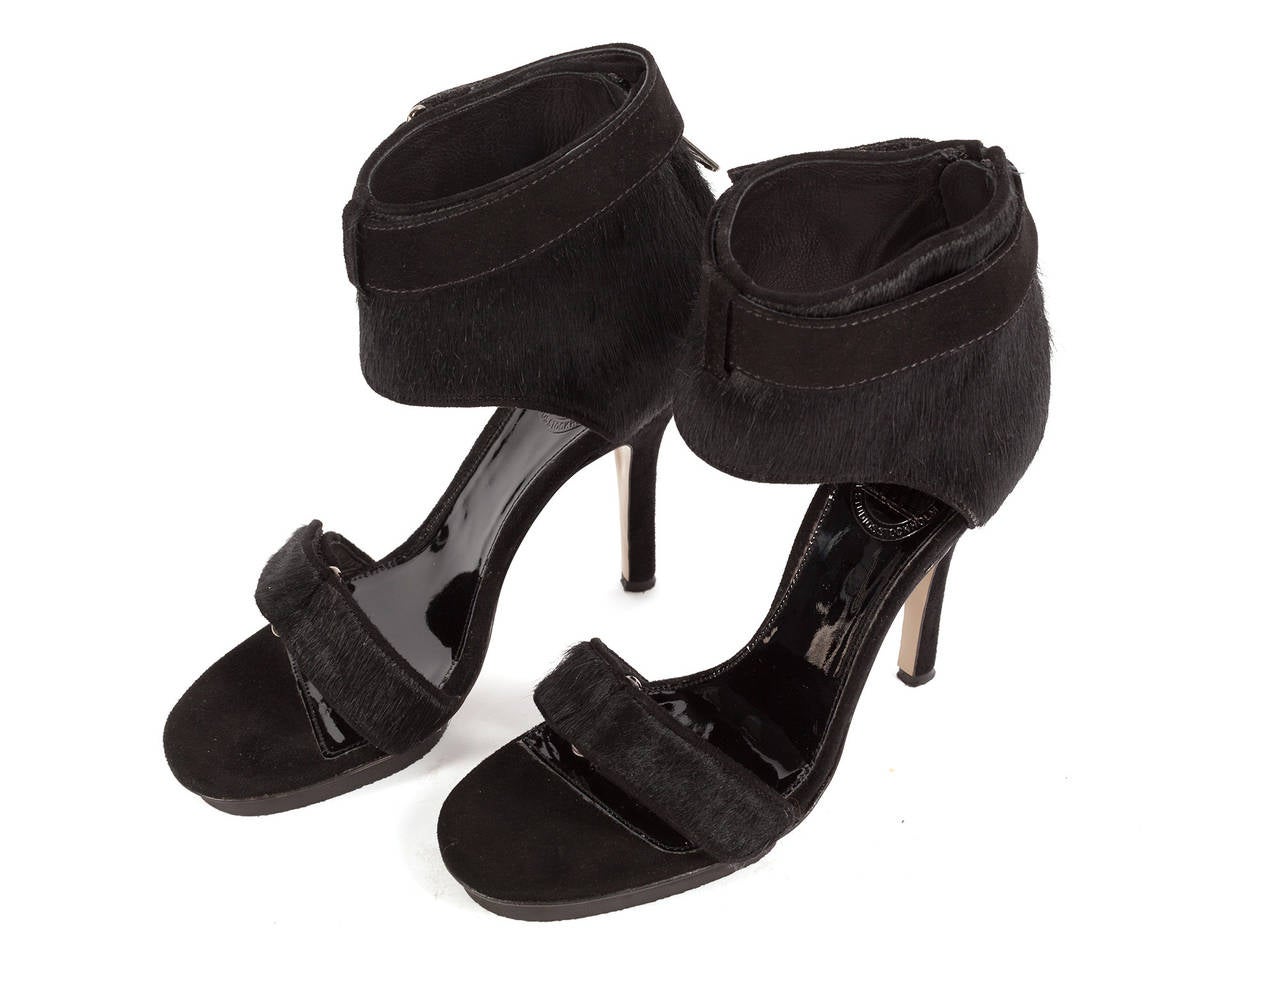 Heels have large ankle strap with strap around top of ankle velro closure, front toe strap with velcro and sexy stiletto heel in black suede.